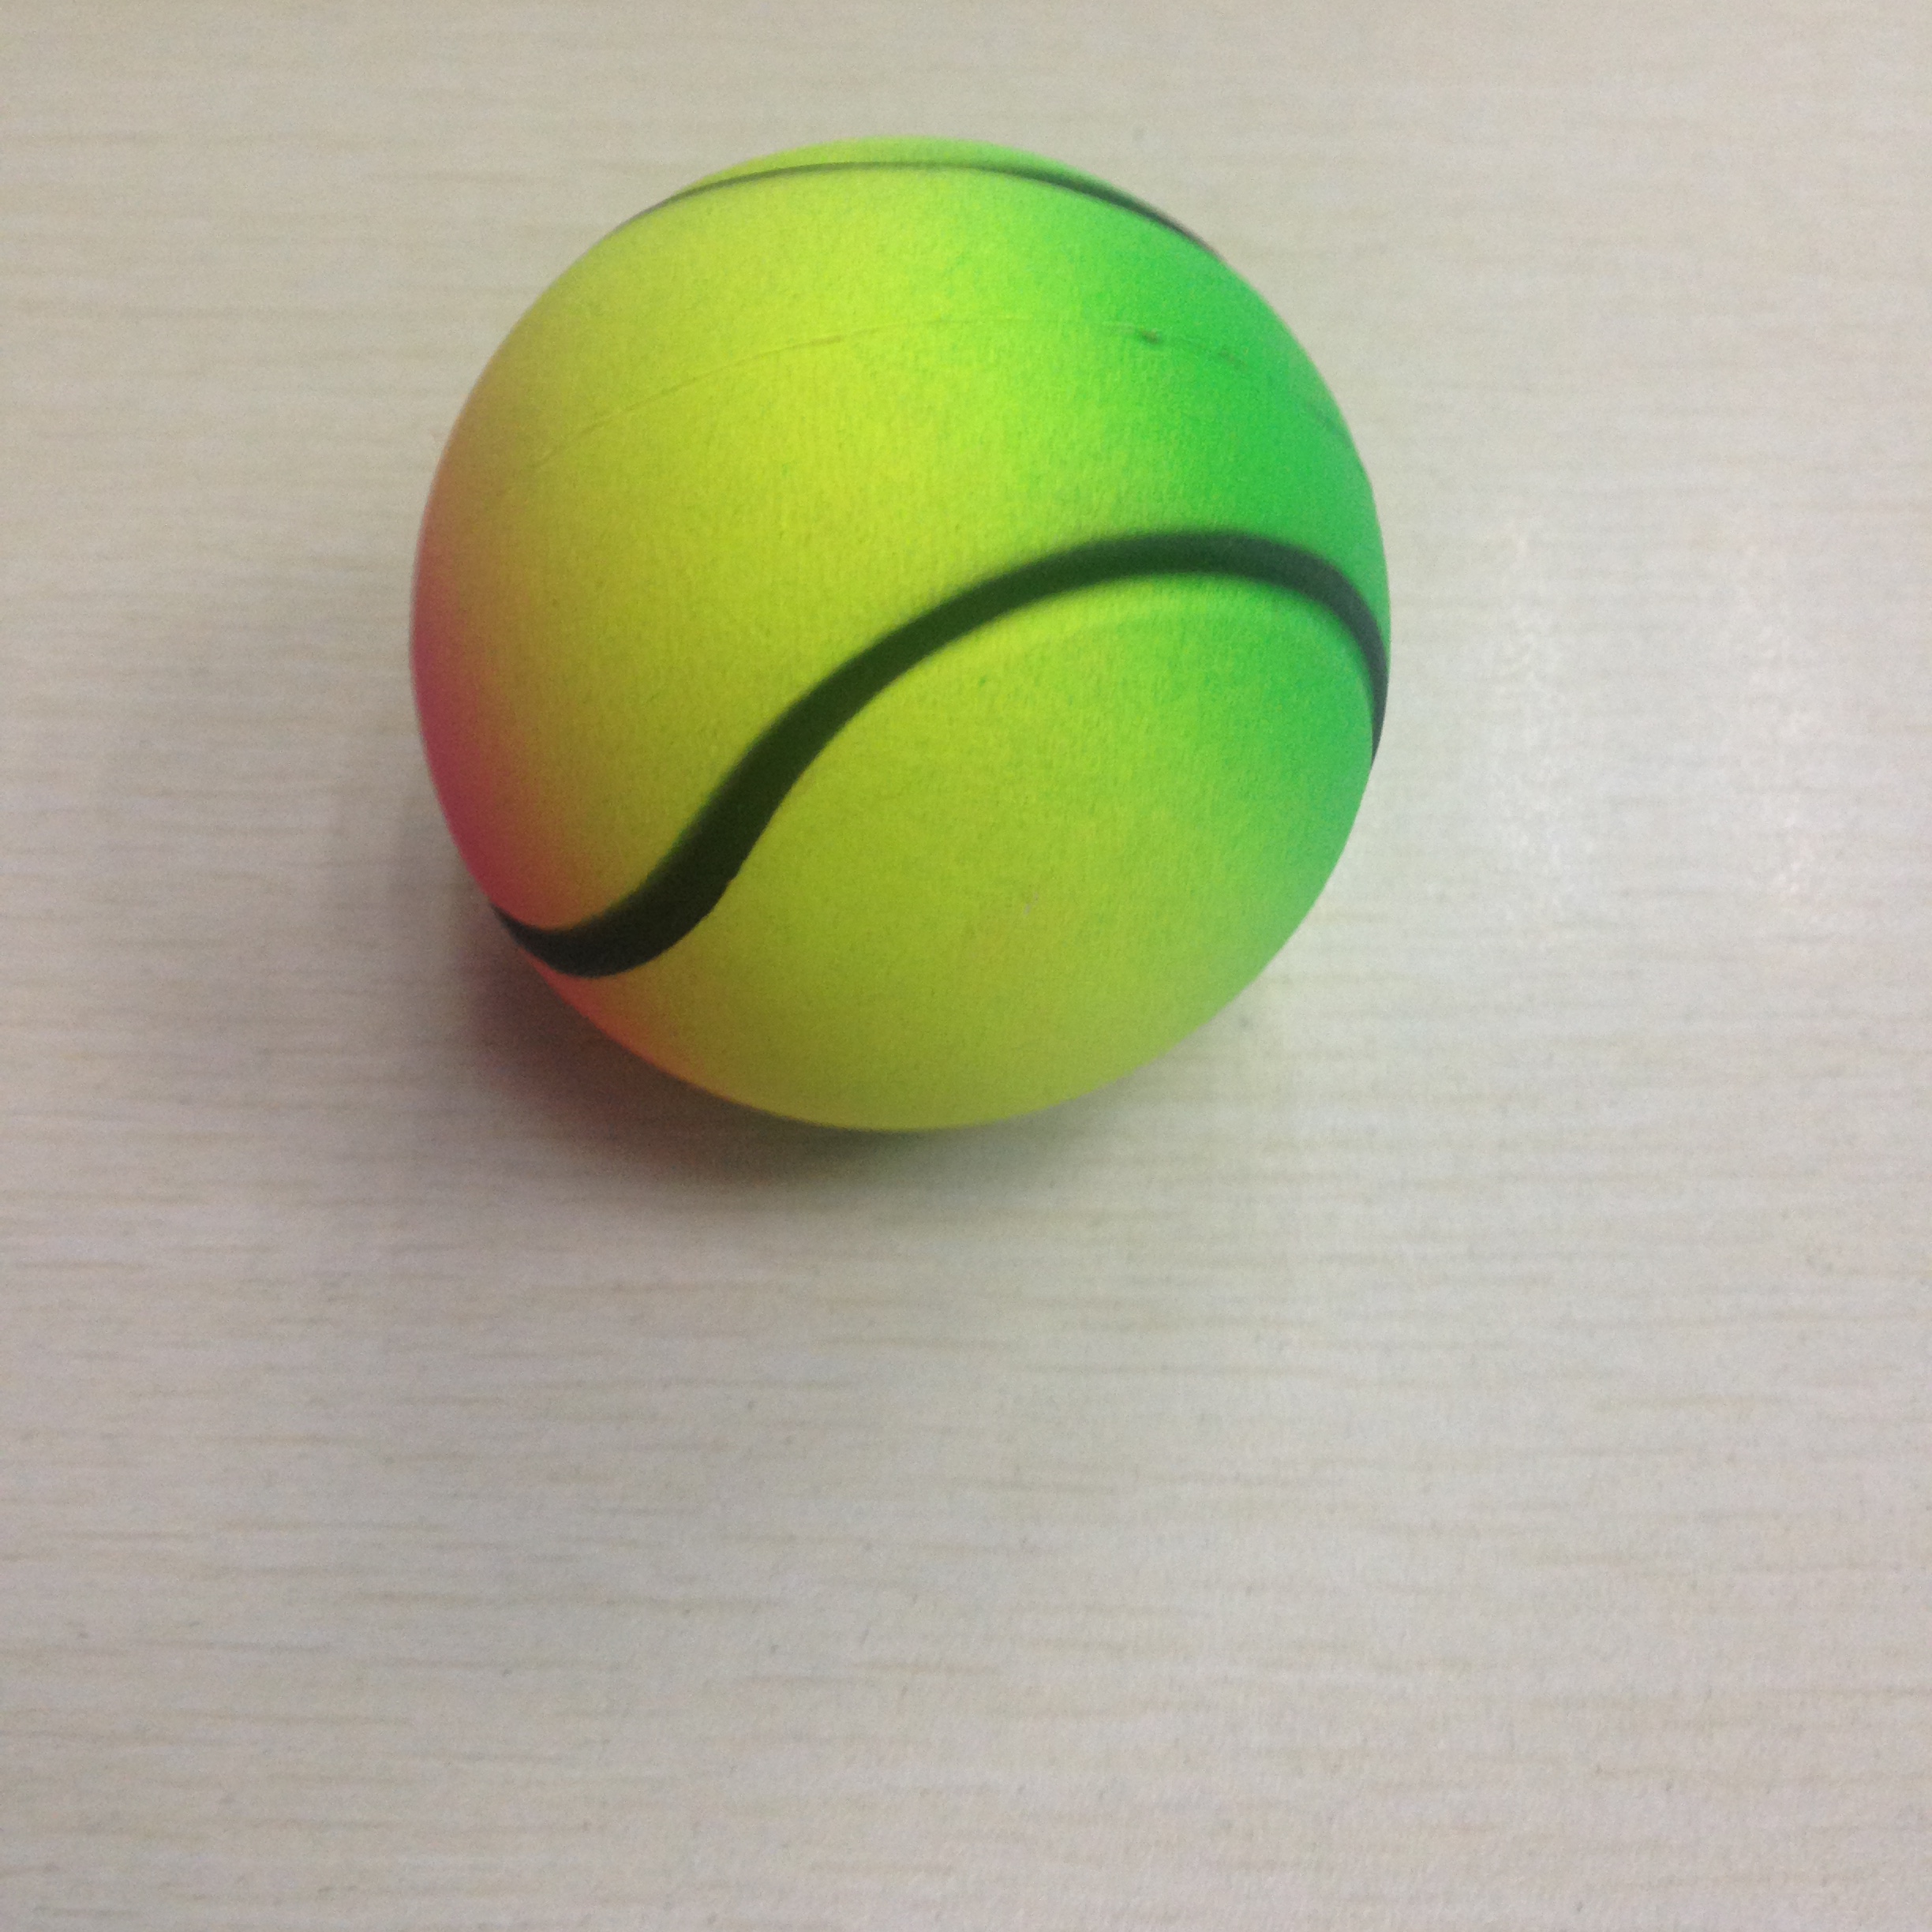 Tennis solid ball Elastic ball for children toy​